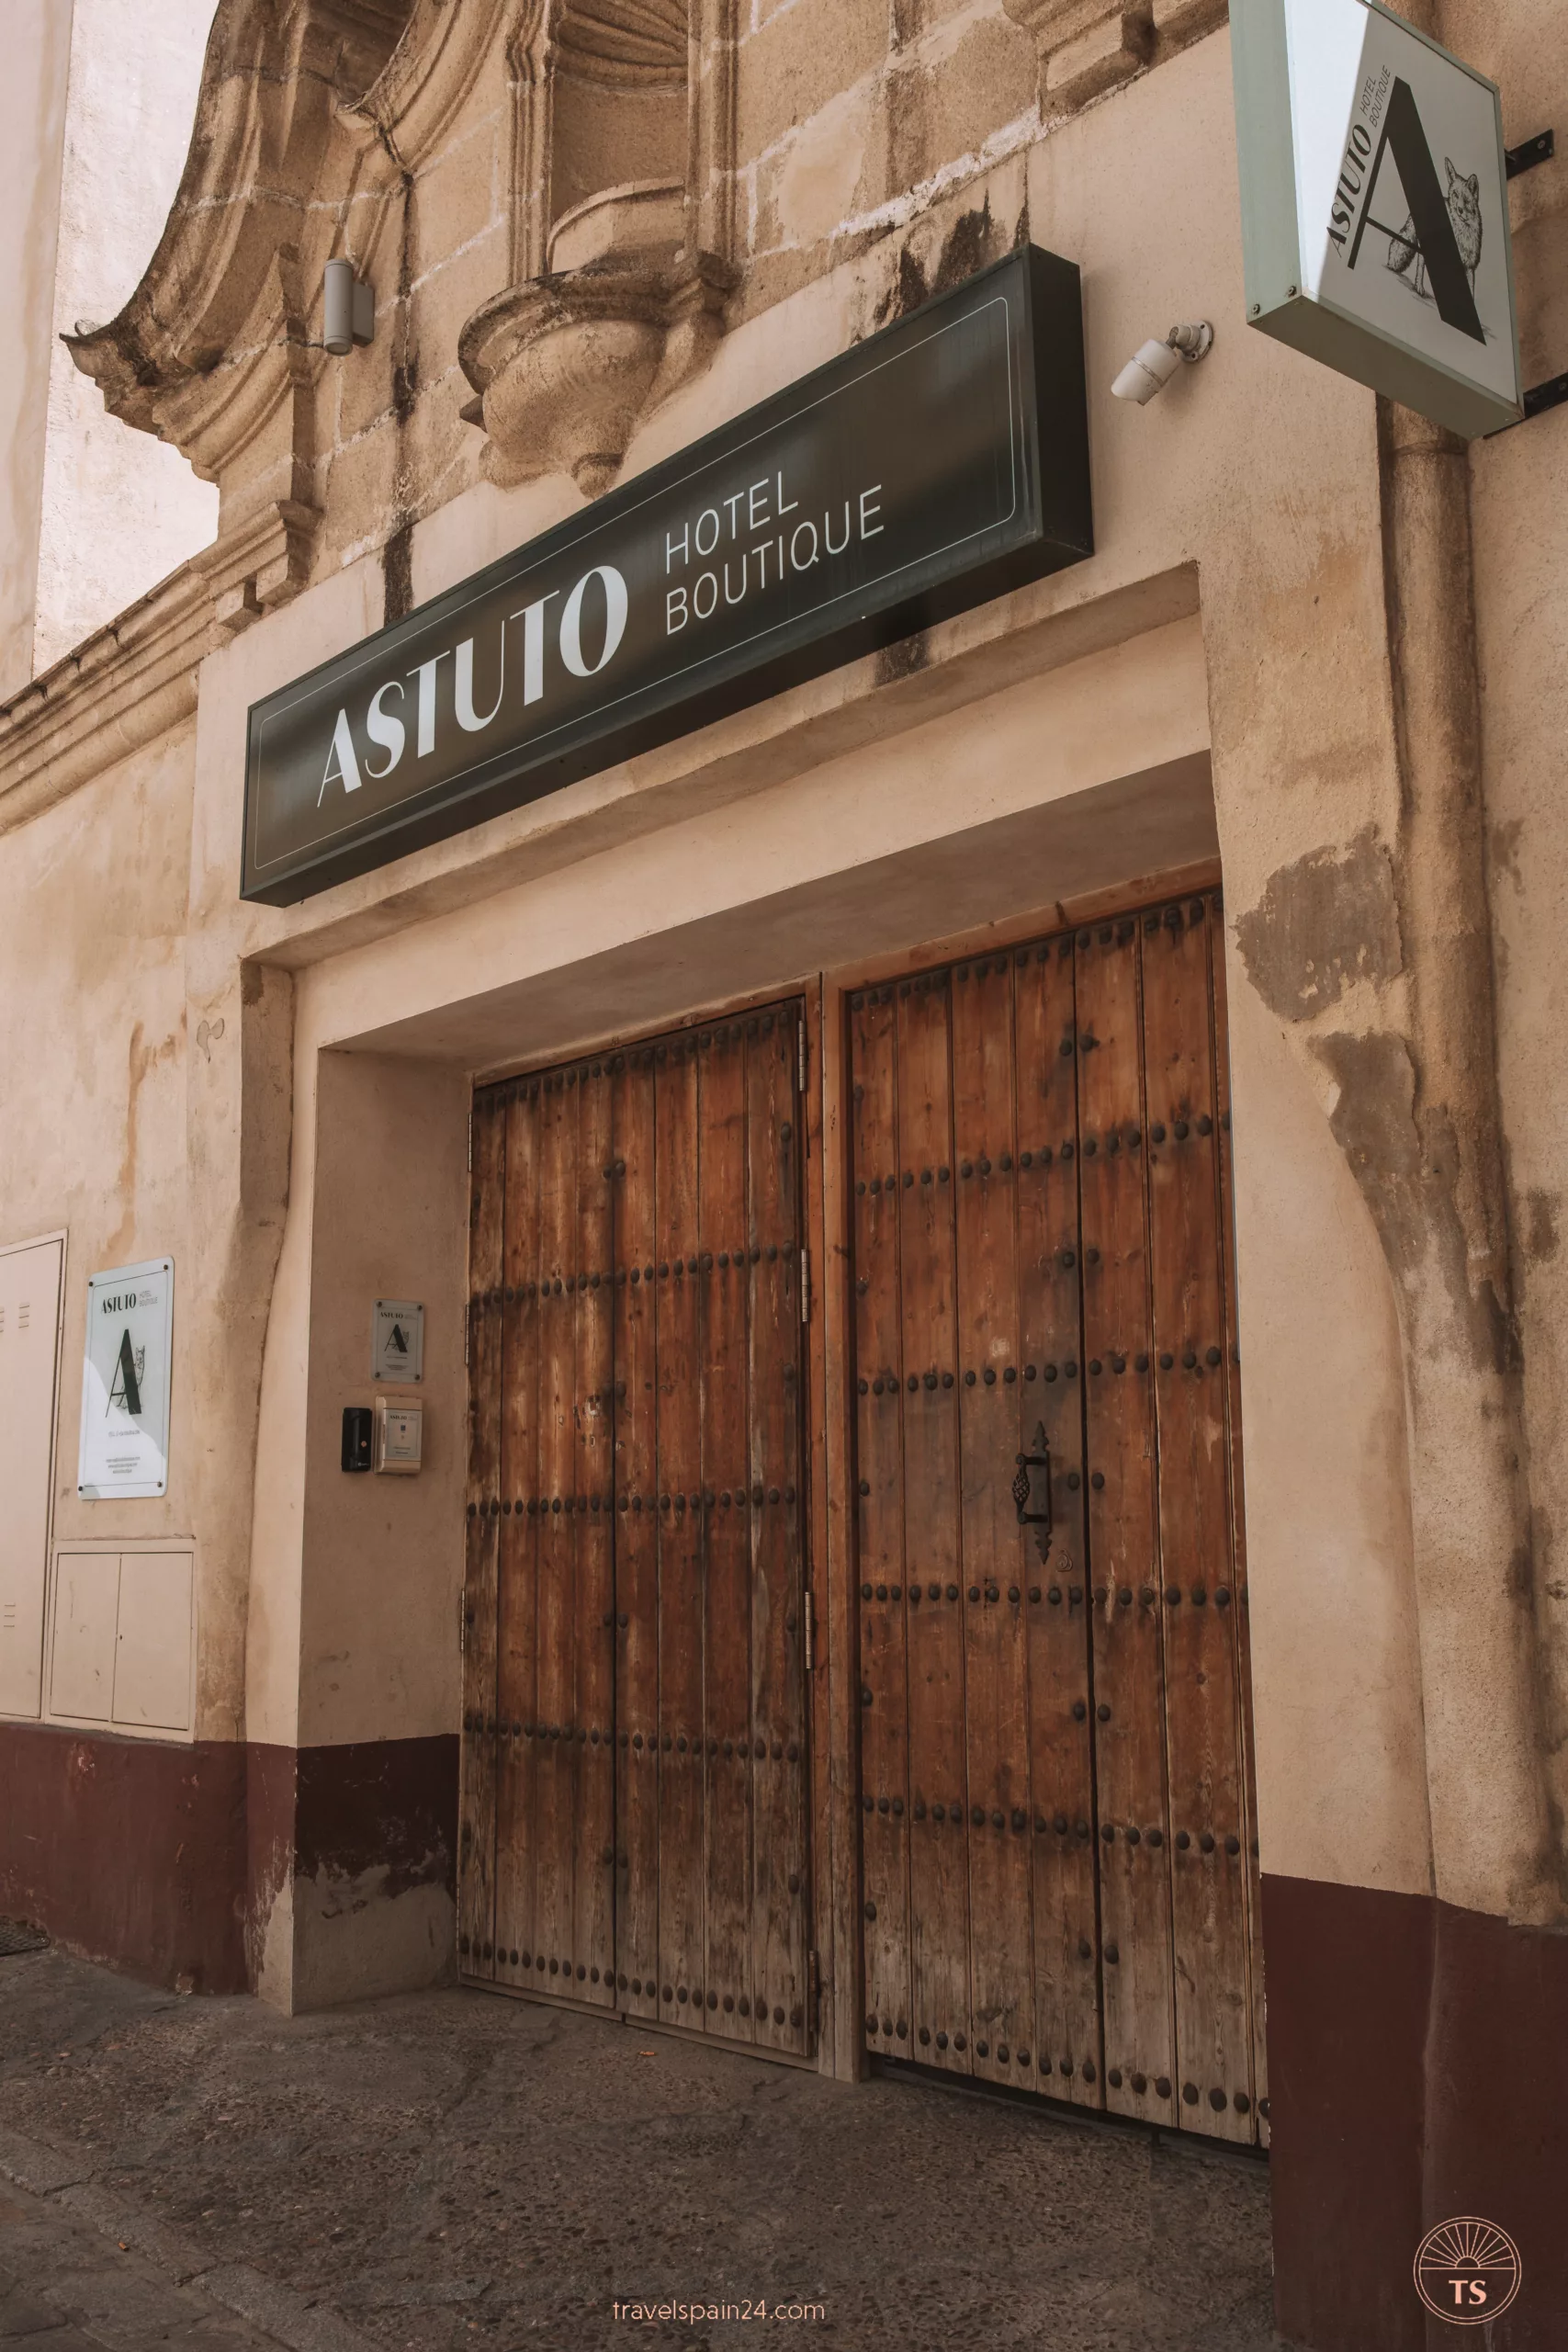 Entrance to Astuto Boutique Jerez in Jerez de la Frontera, displaying the modern and stylish entrance. This image relates to the post by showcasing a trendy adults-only hotel in Jerez de la Frontera.